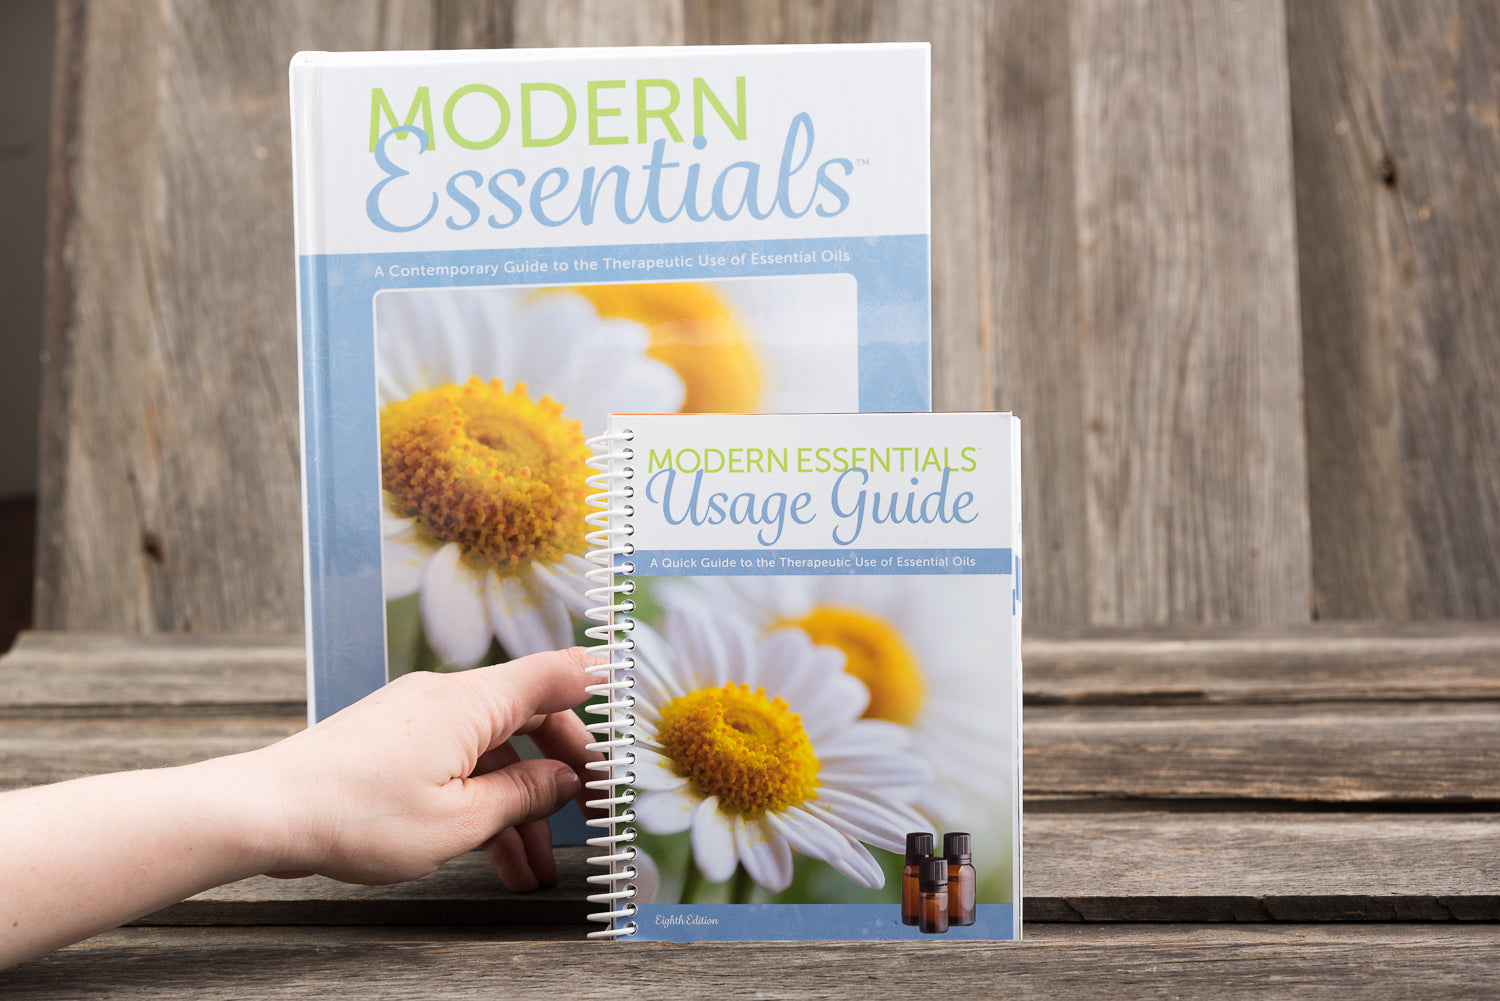 Newest Editions of Modern Essentials Publications